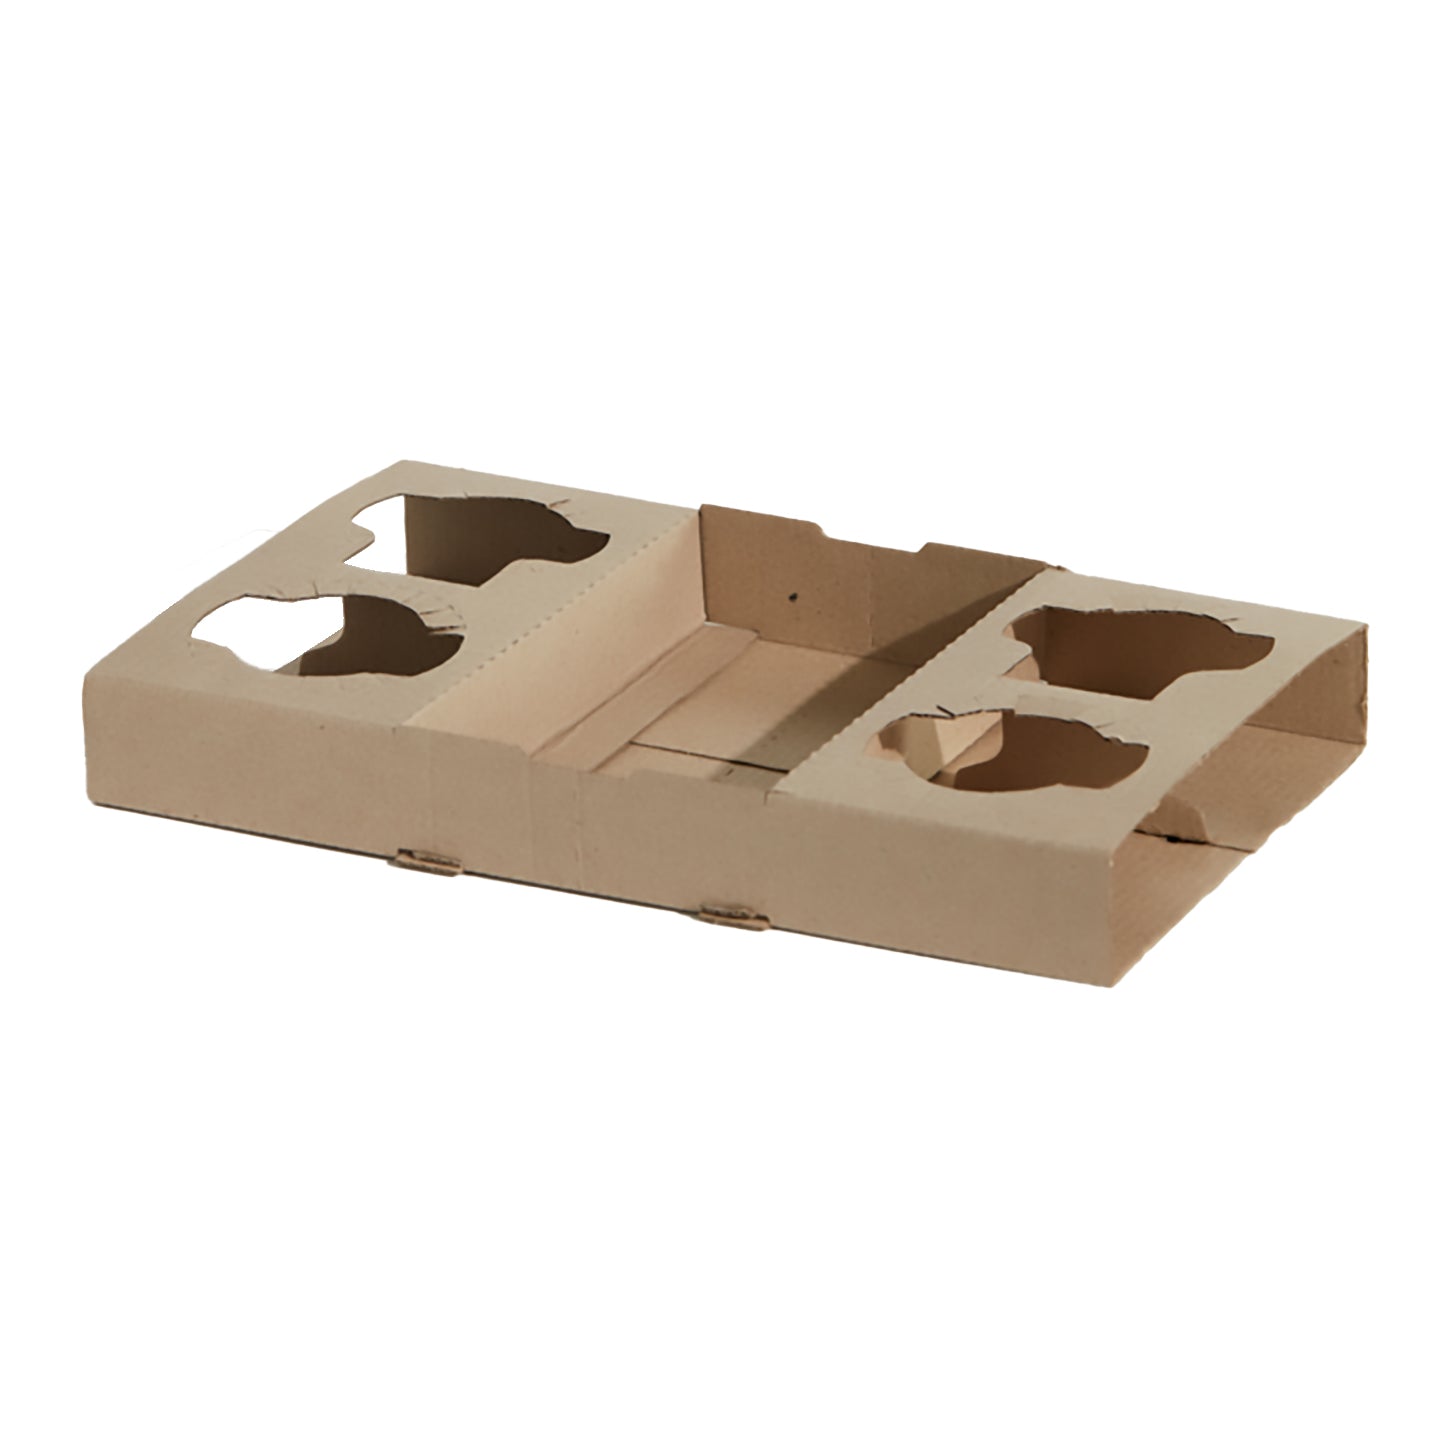 4 CUP COFFEE TRAY - CTN OF 100